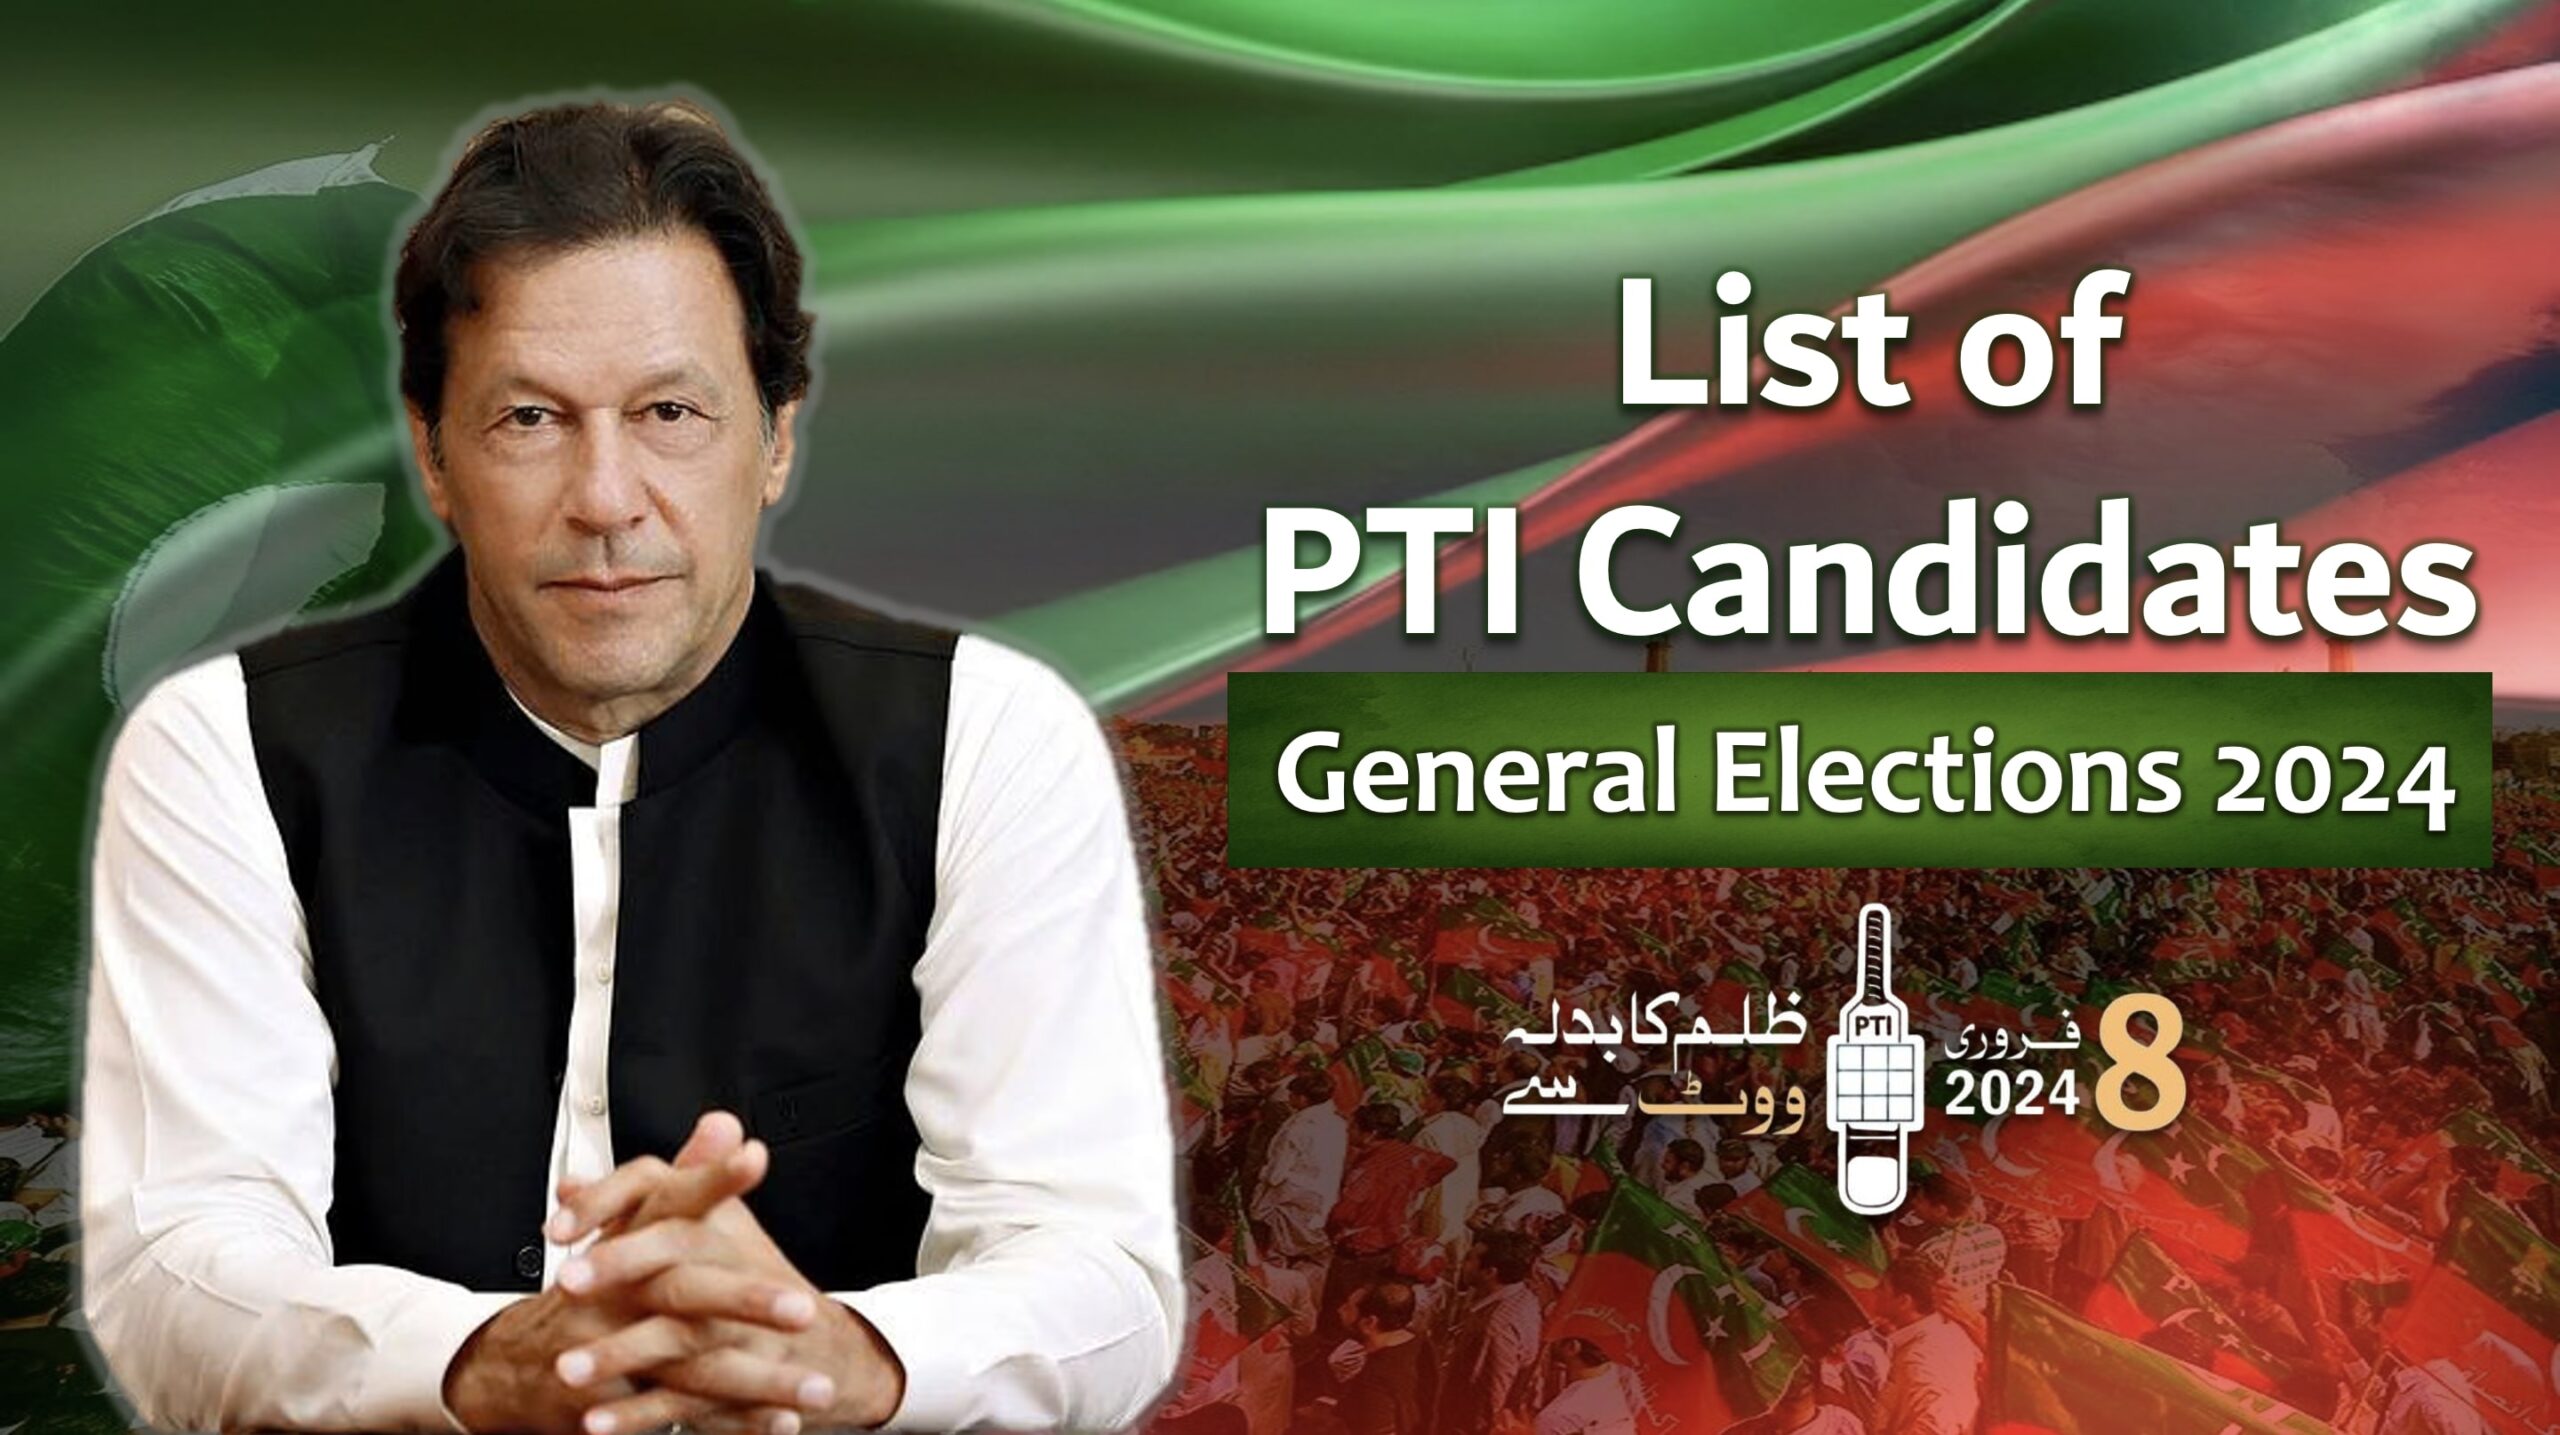 List of PTI Candidates: General Elections 2024